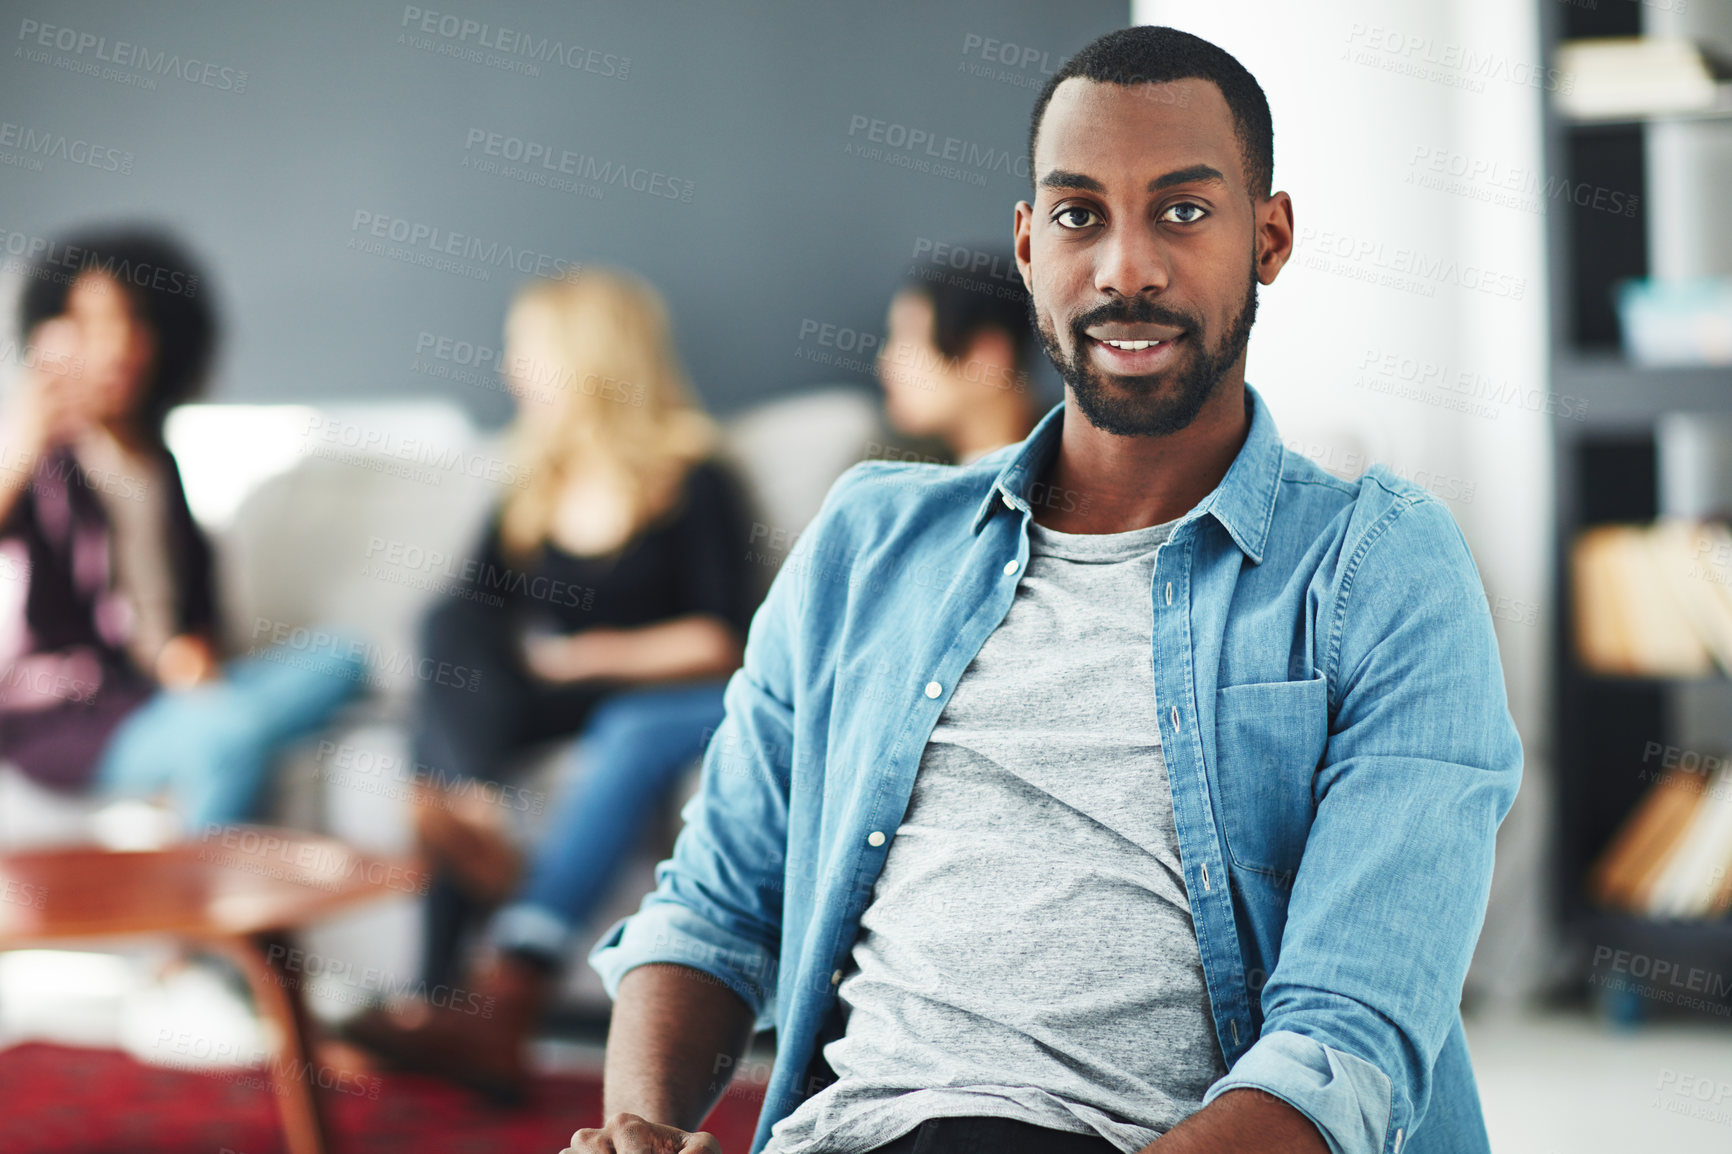 Buy stock photo Casual, cool and trendy businessman, marketing manager or entrepreneur at a team informal brainstorming meeting. Face portrait of a young and stylish man at a gathering with colleagues in background